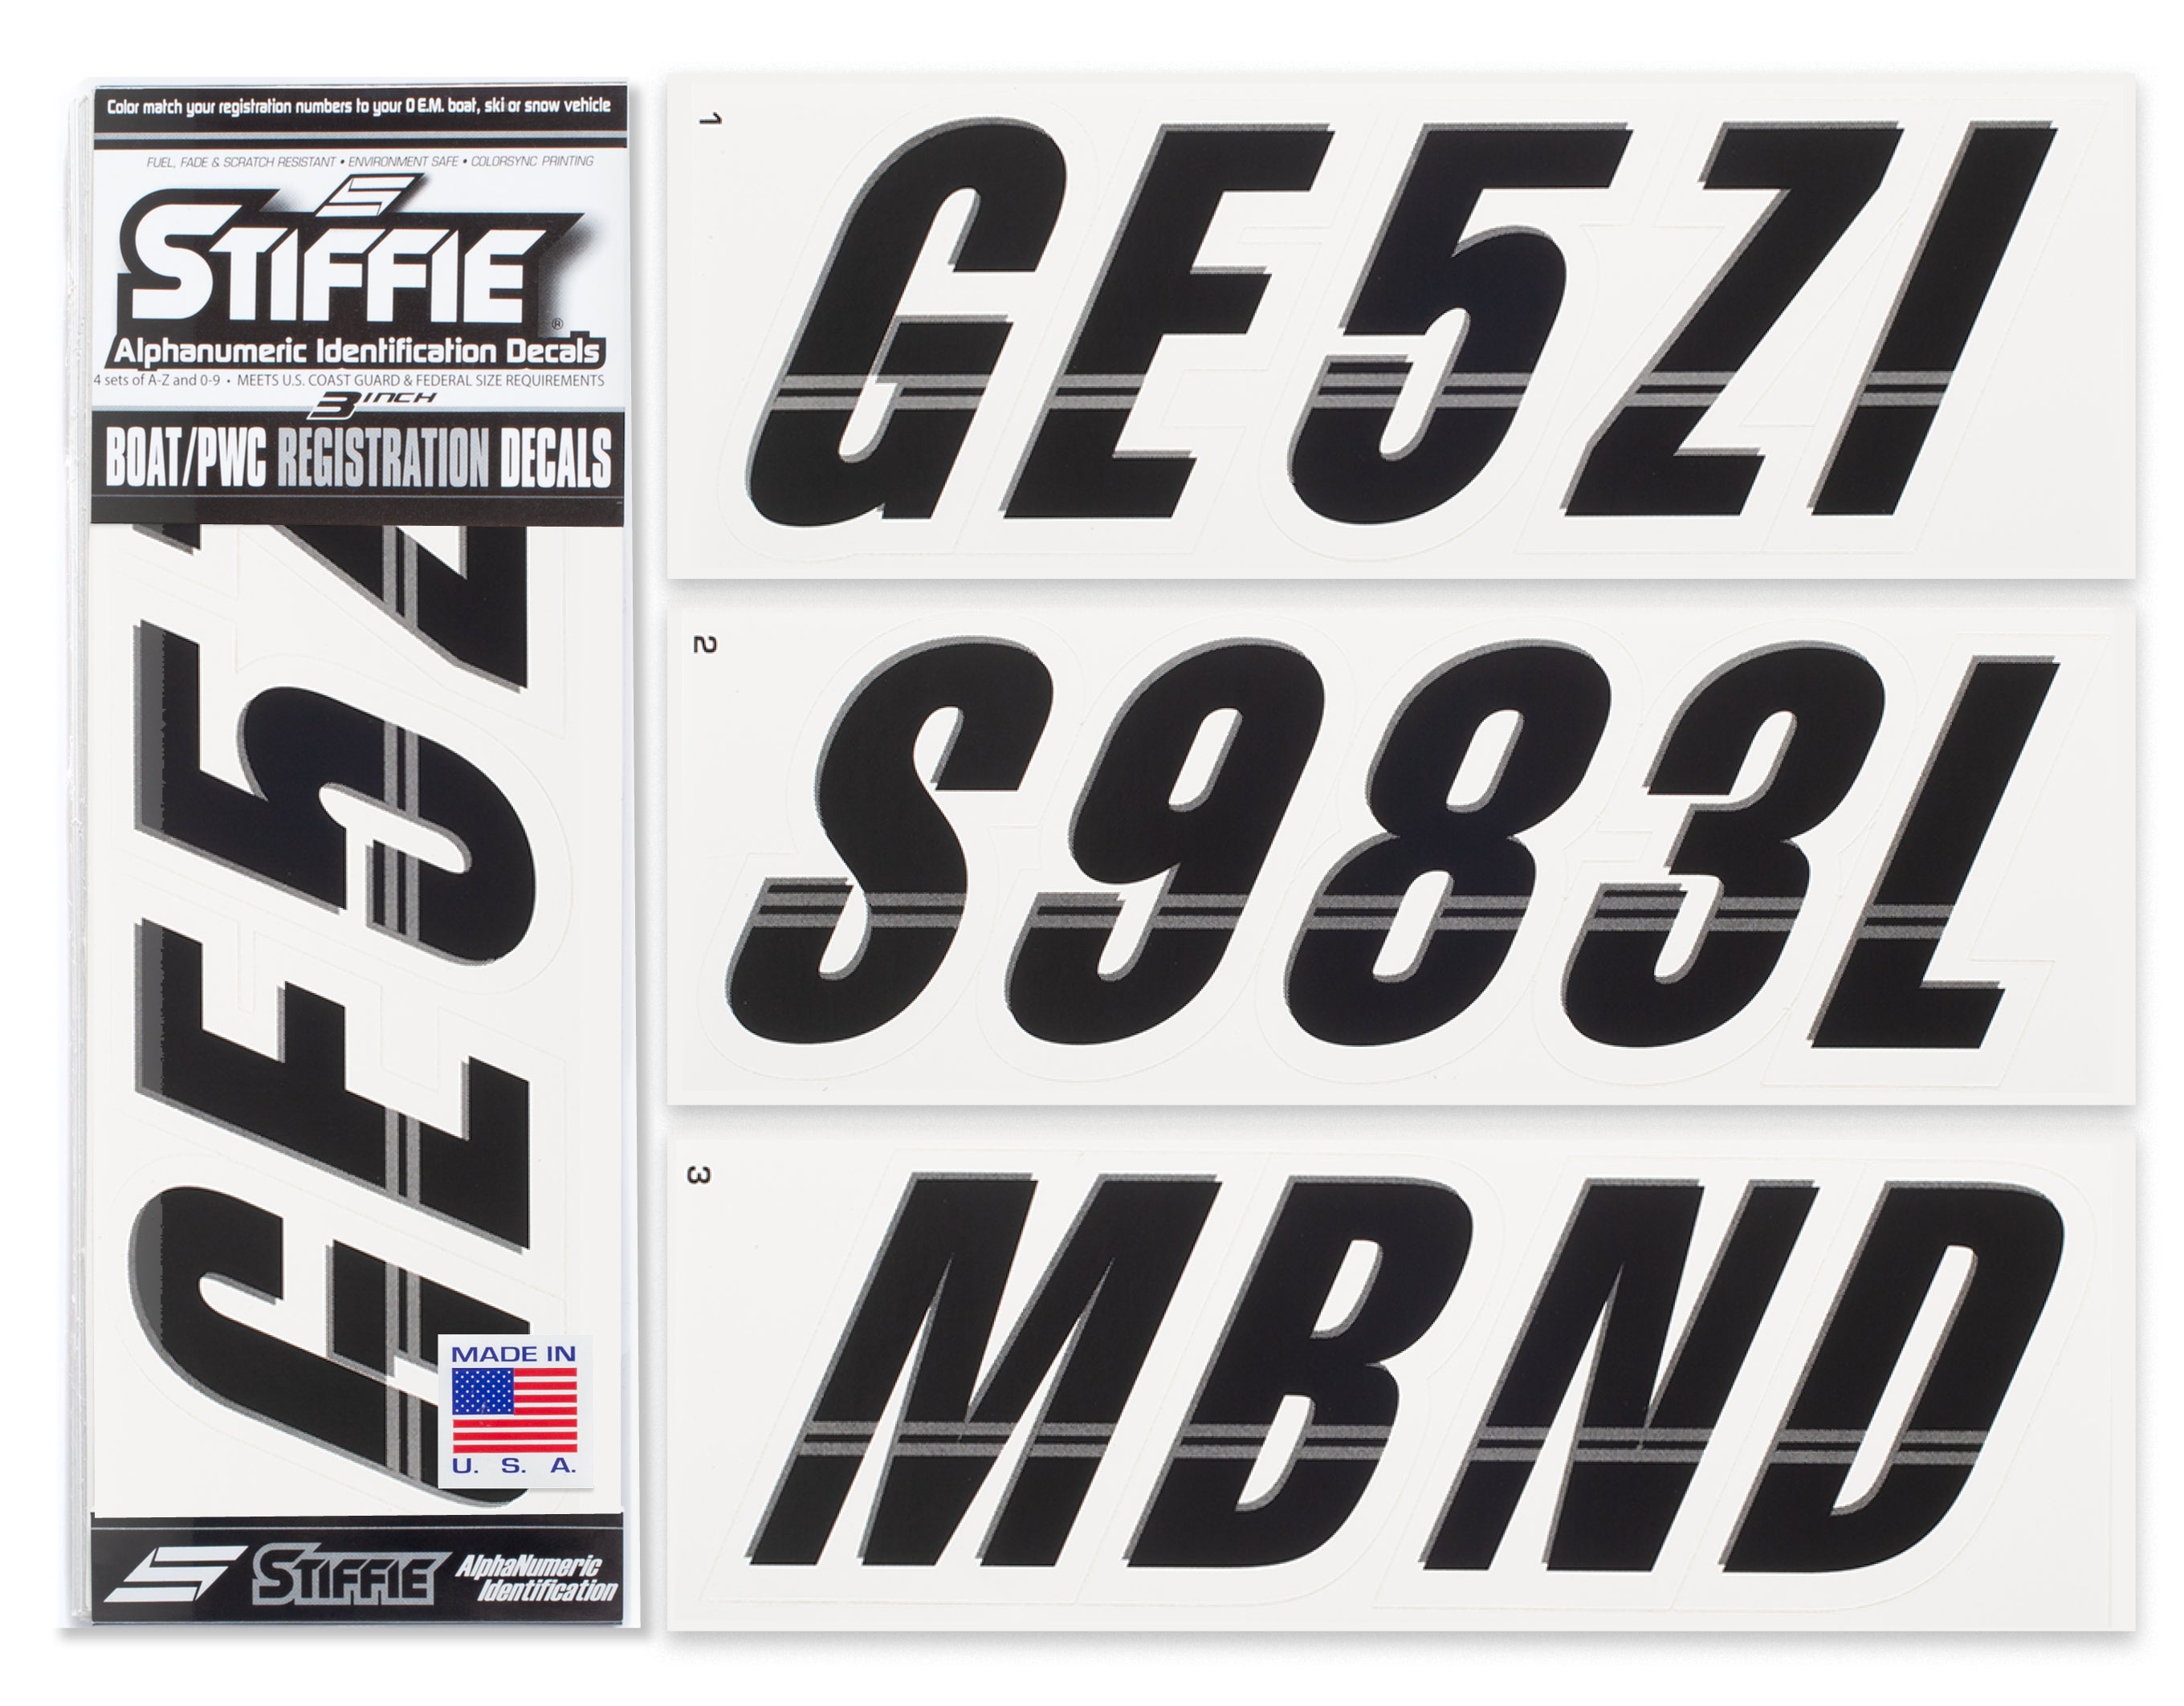 STIFFIE Techtron Black/White 3" Alpha-Numeric Registration Identification Numbers Stickers Decals for Boats & Personal Watercraft